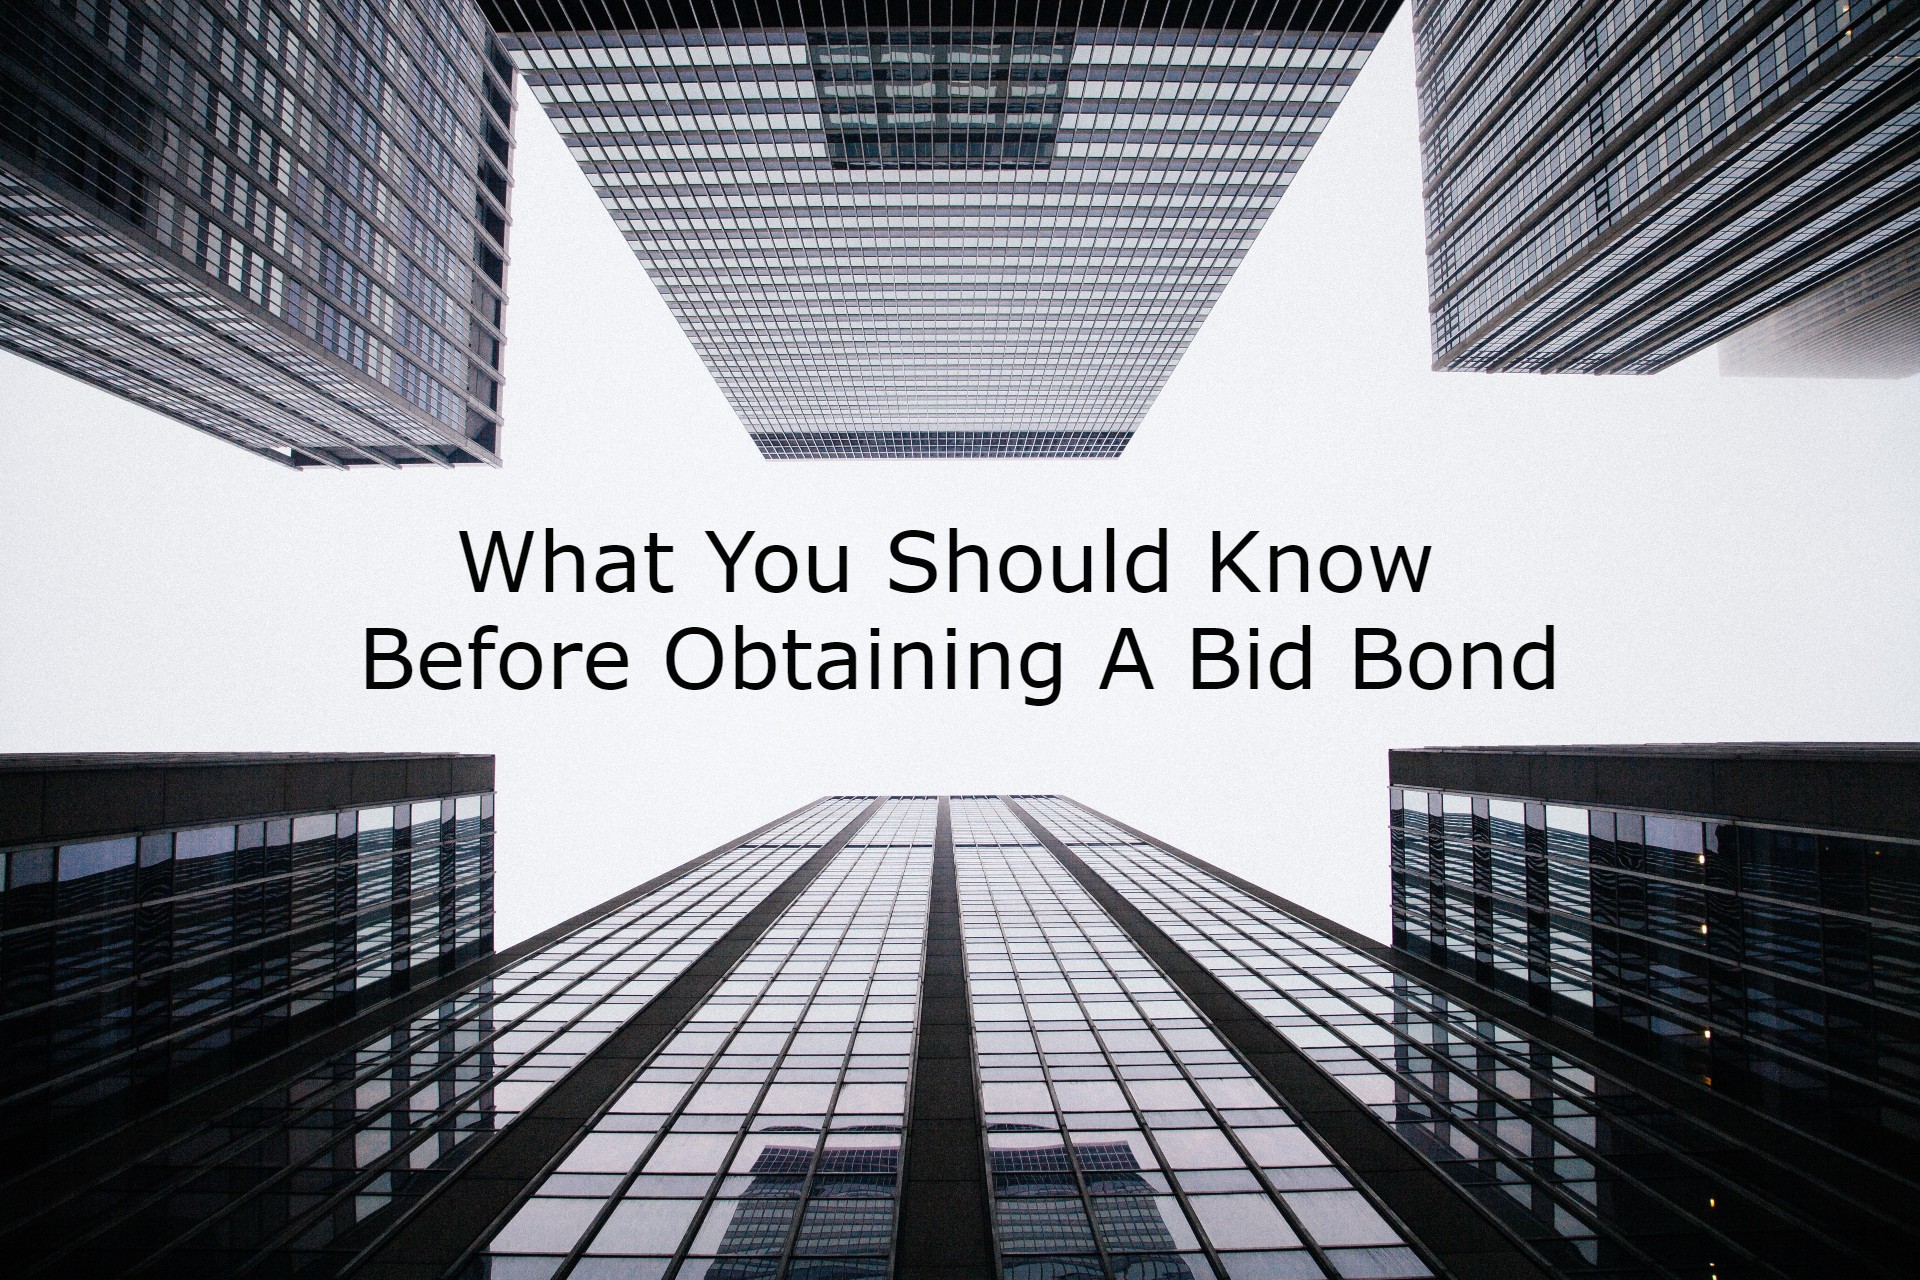 bid bonds - do you make monthly payments on bid bonds - buildings in black and white